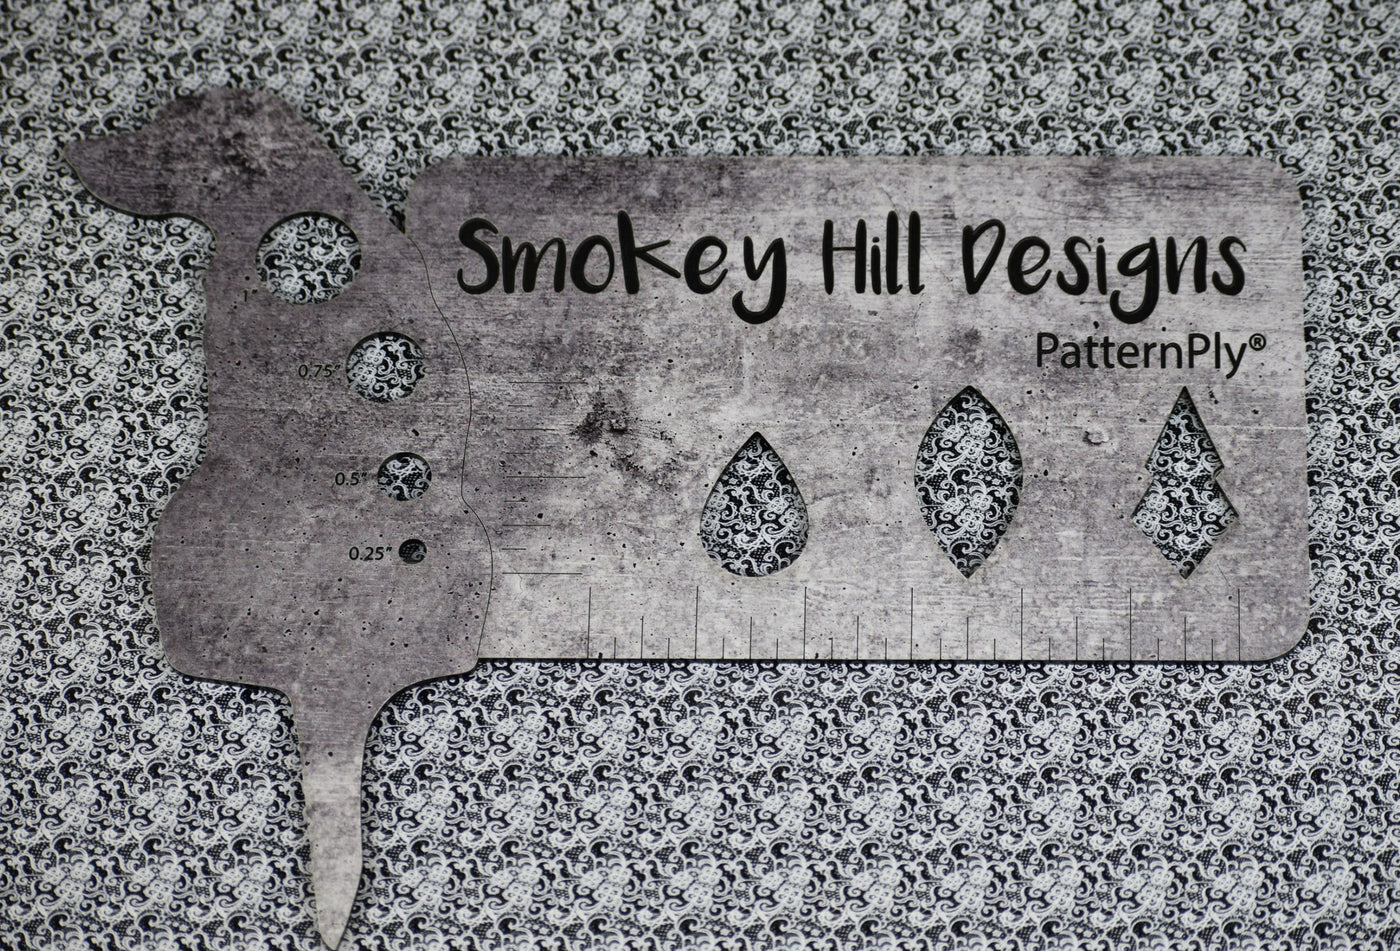 PatternPly® Scattered Micro White Lace